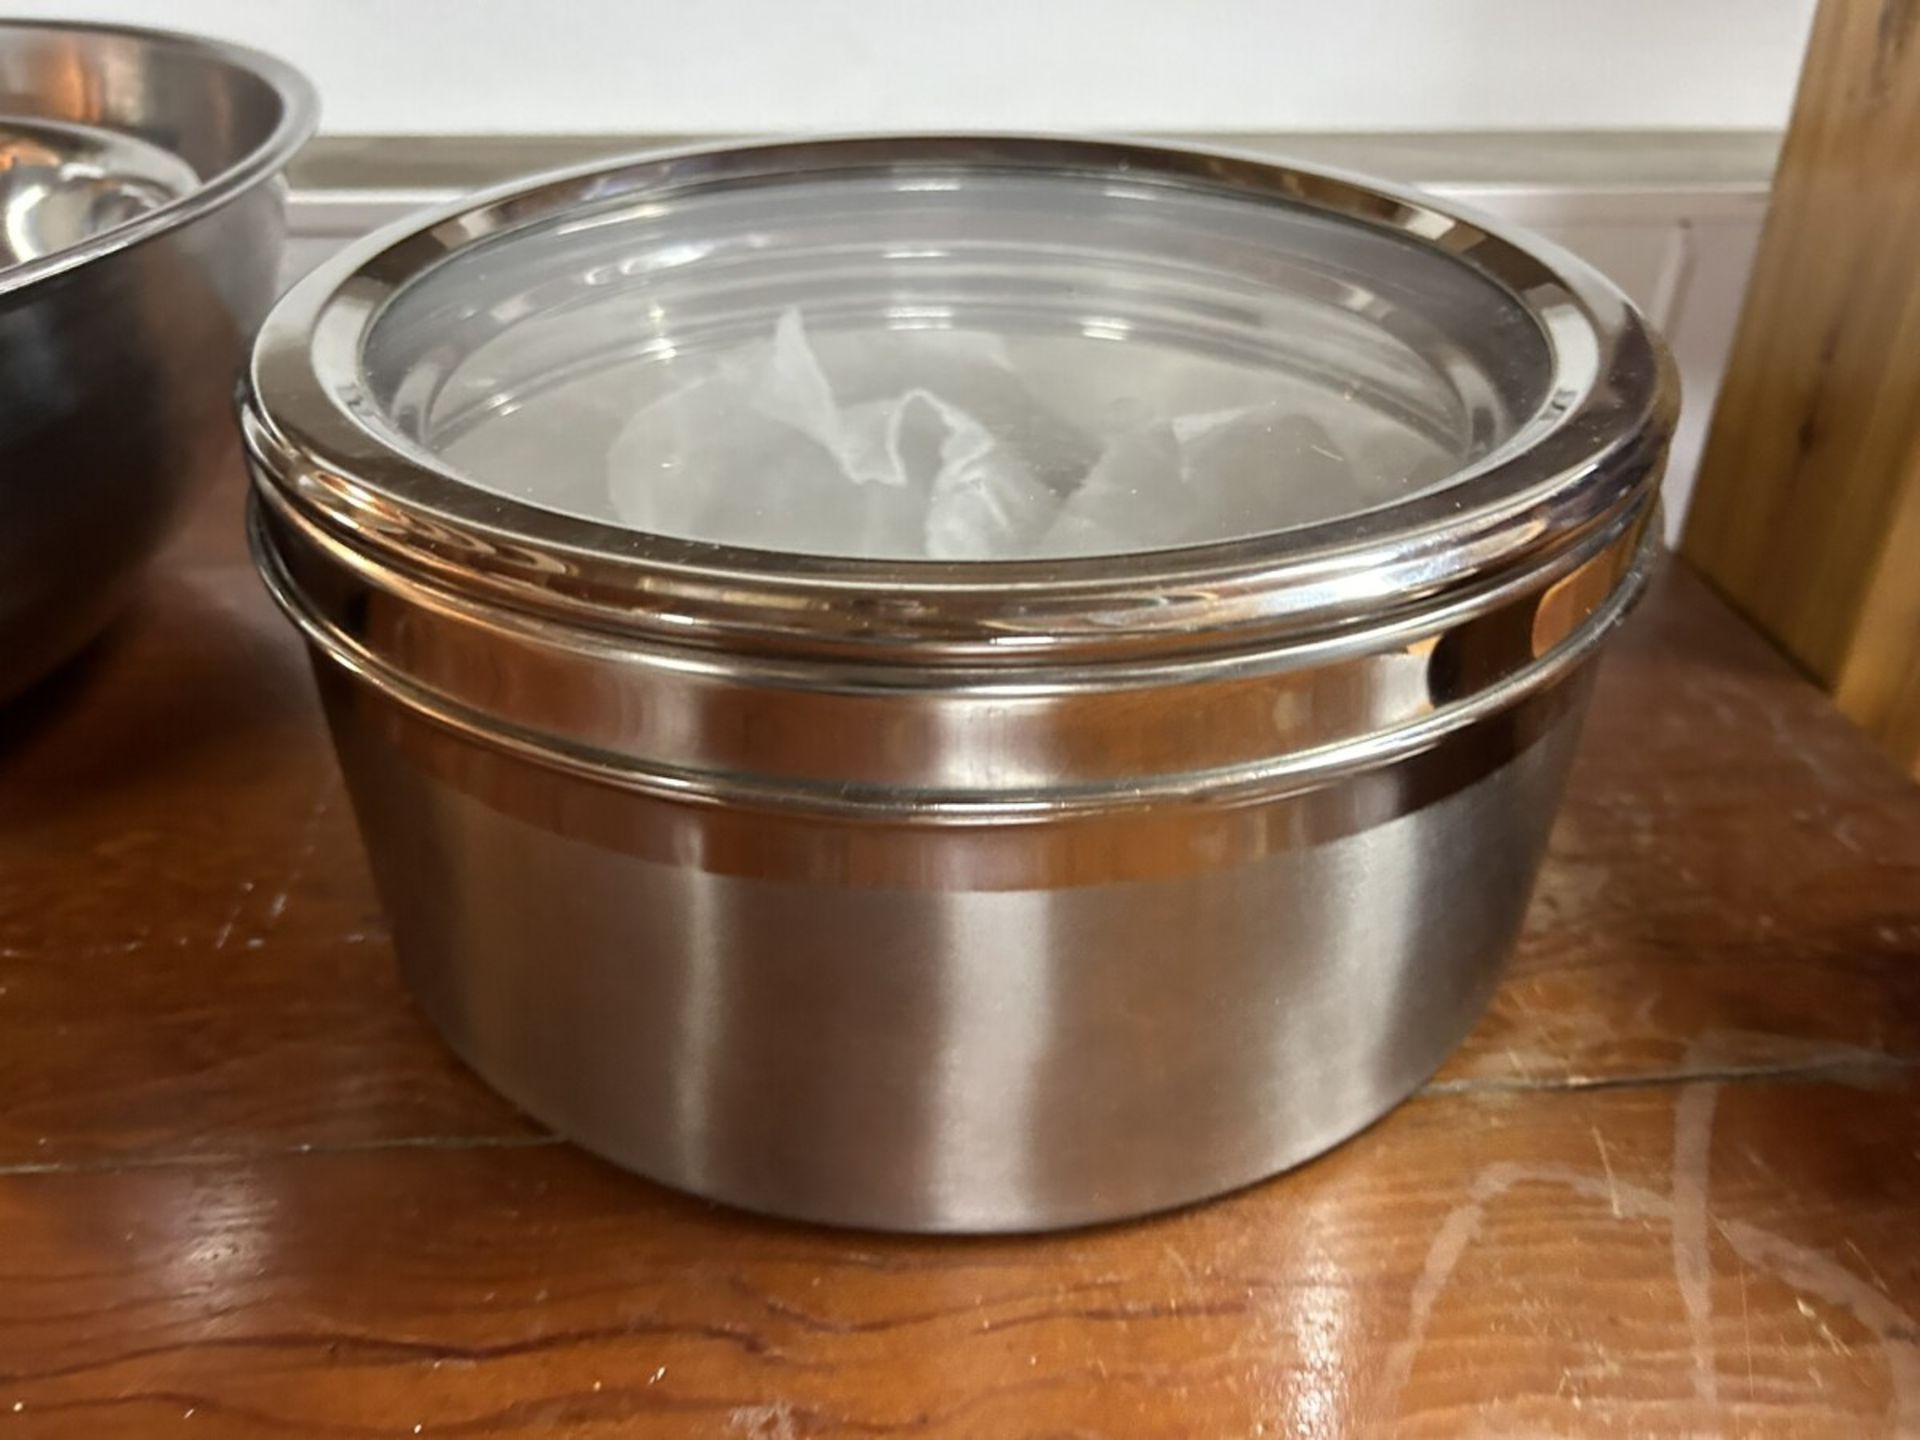 L/O ASSORTED STAINLESS STEEL BOWLS, STANLESS STEEL STACKING TINS - Image 2 of 4